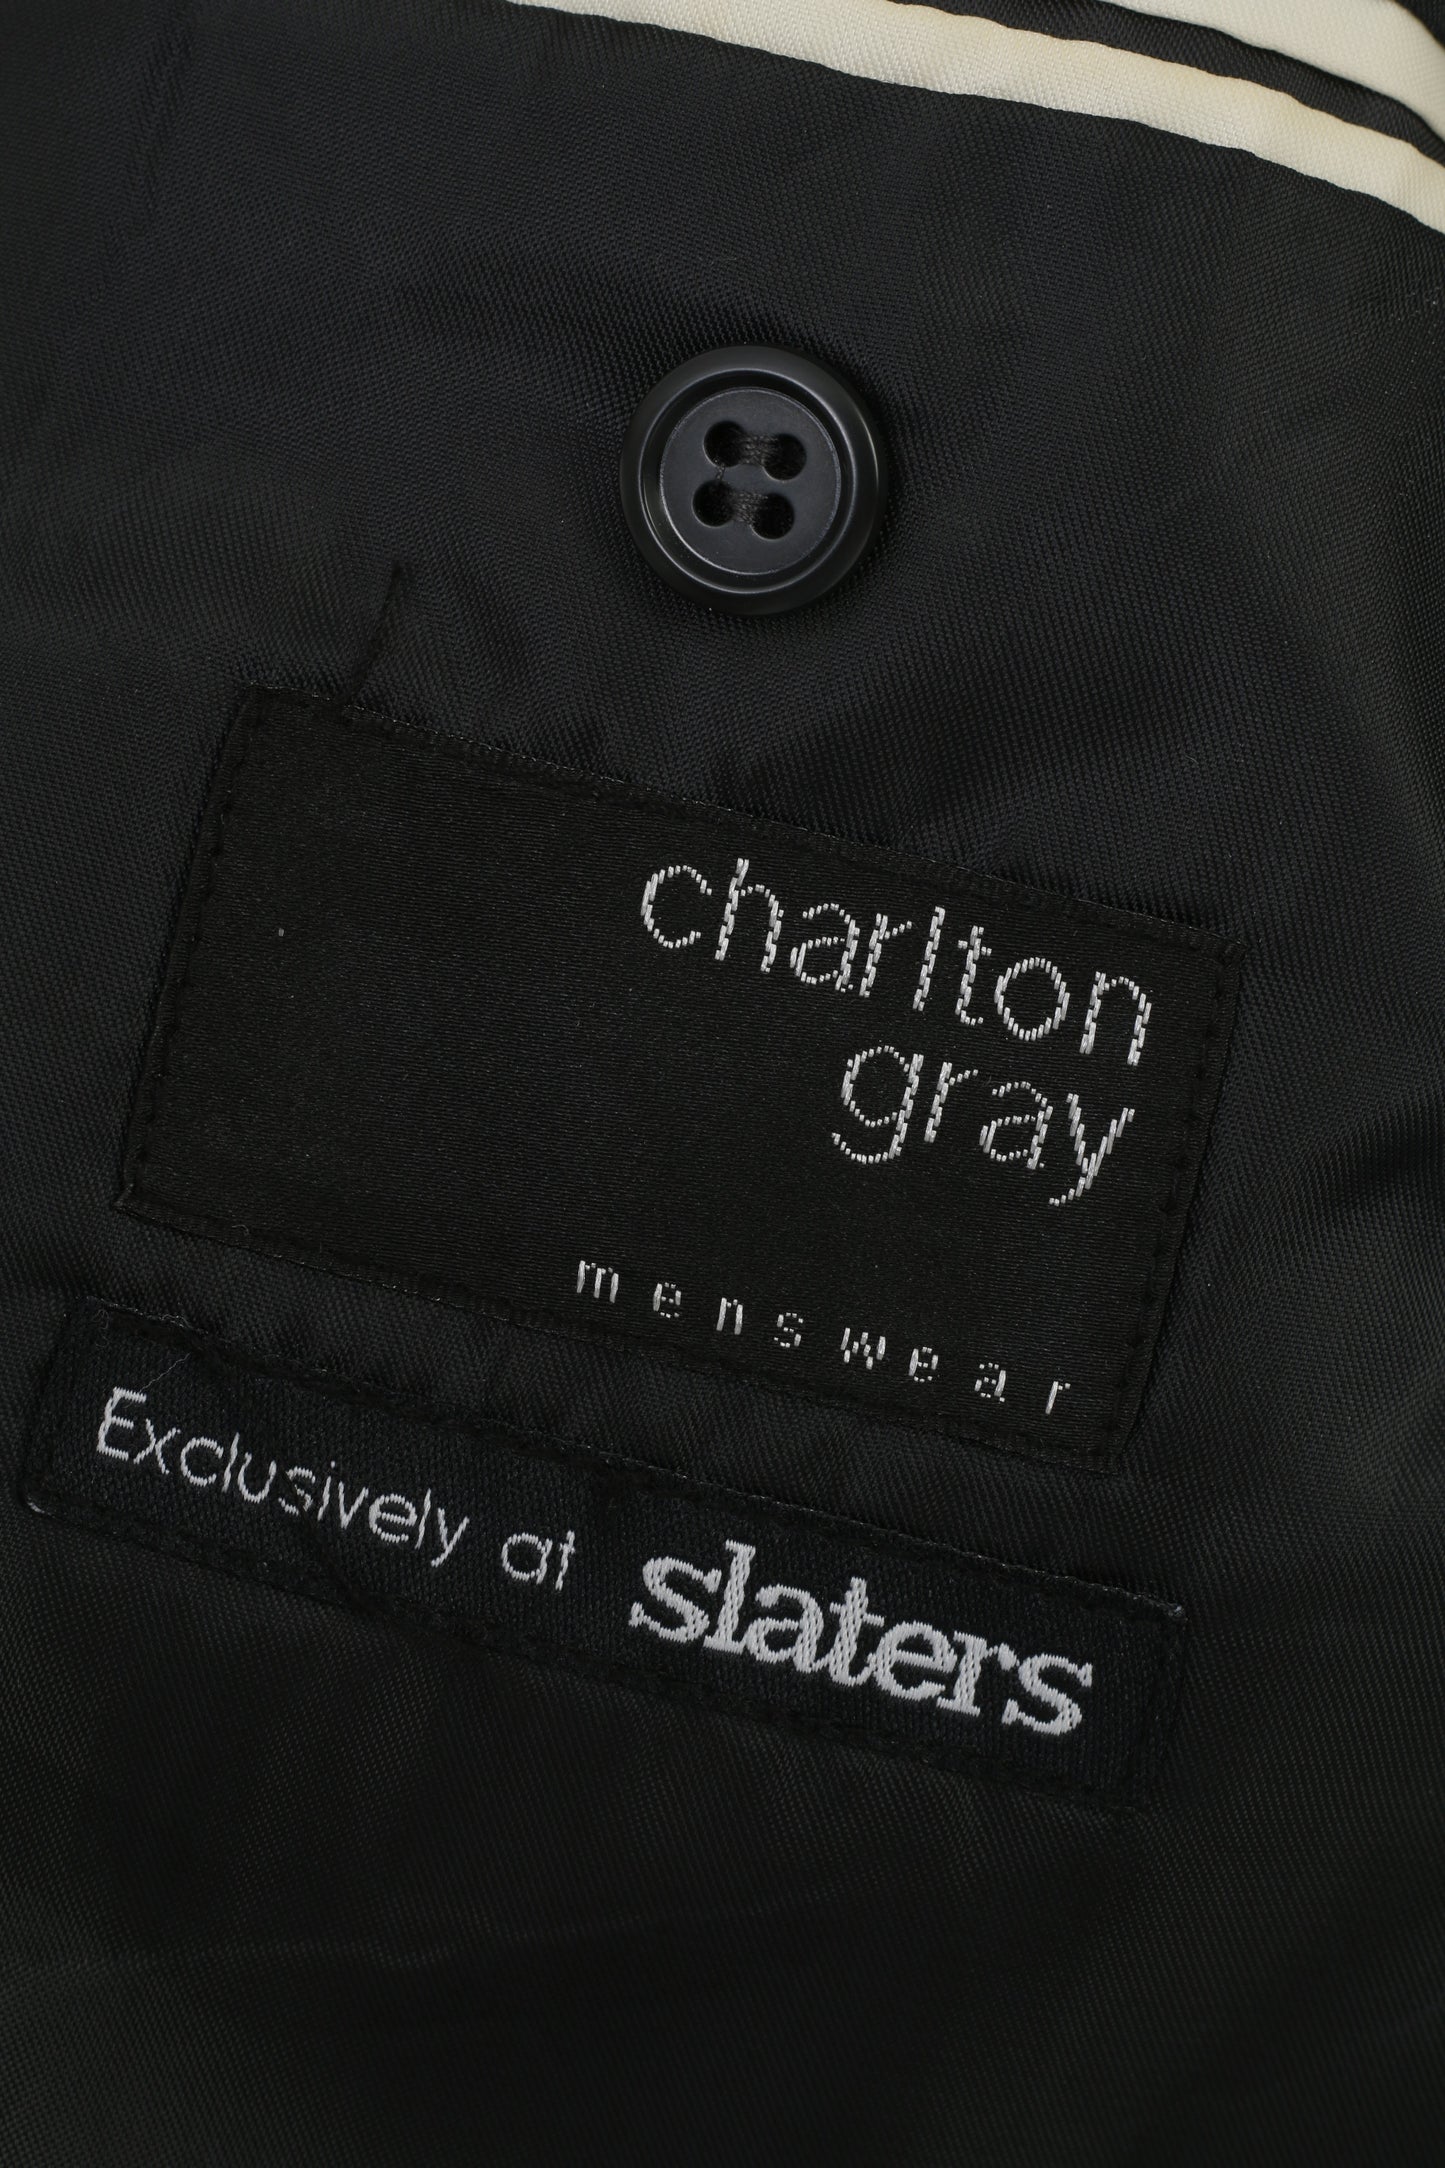 Charlton Gray Men 38 Blazer Grey Breasted Exclusively at Slaters Mens Wear Jacket Top